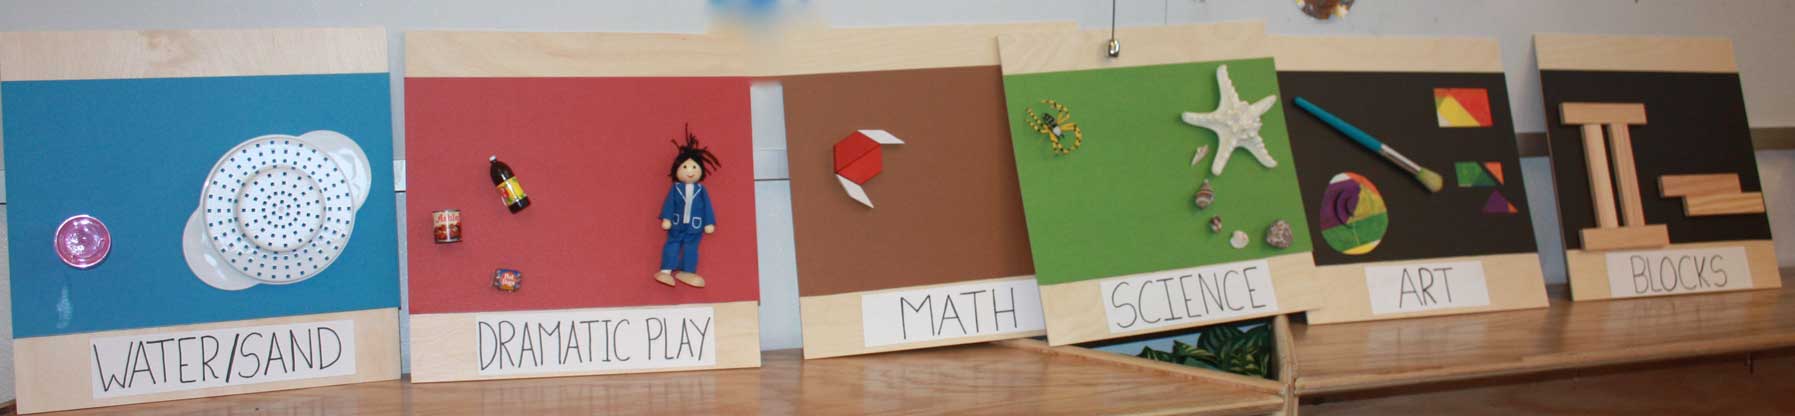 classroom station signs for math, media, dramatic play, science